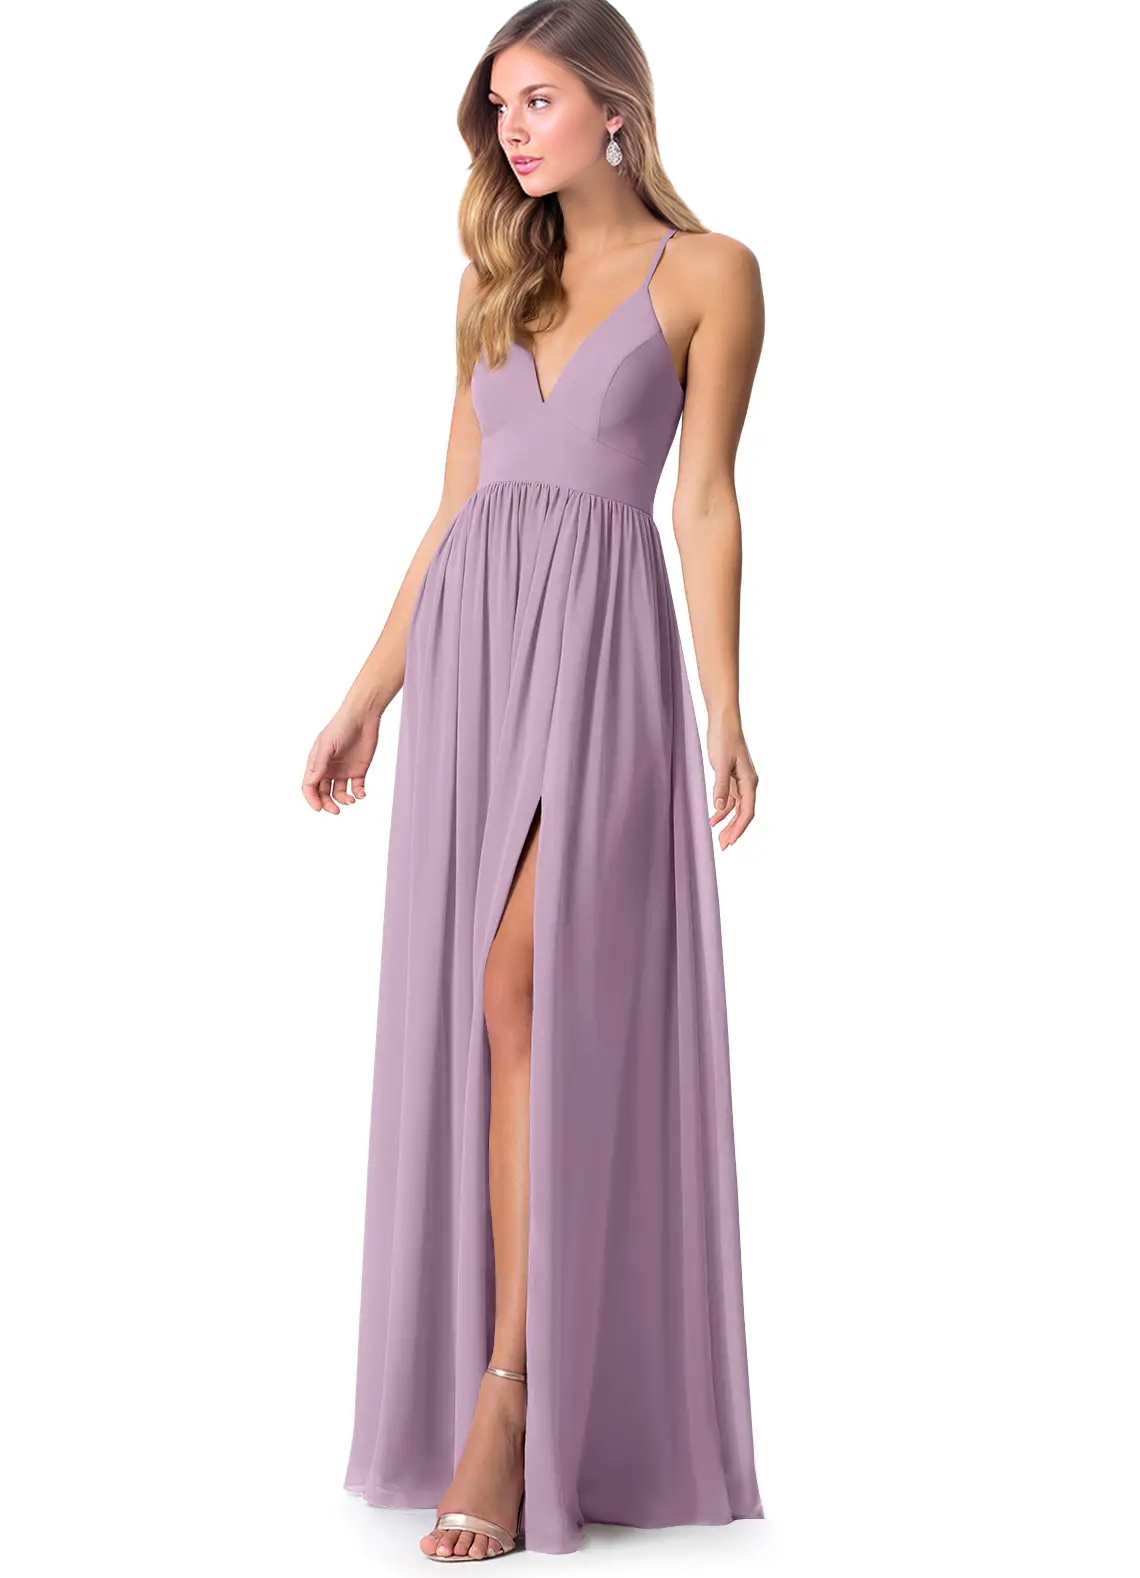 Chiffon Open Back Bridesmaid Dresses With Split Front